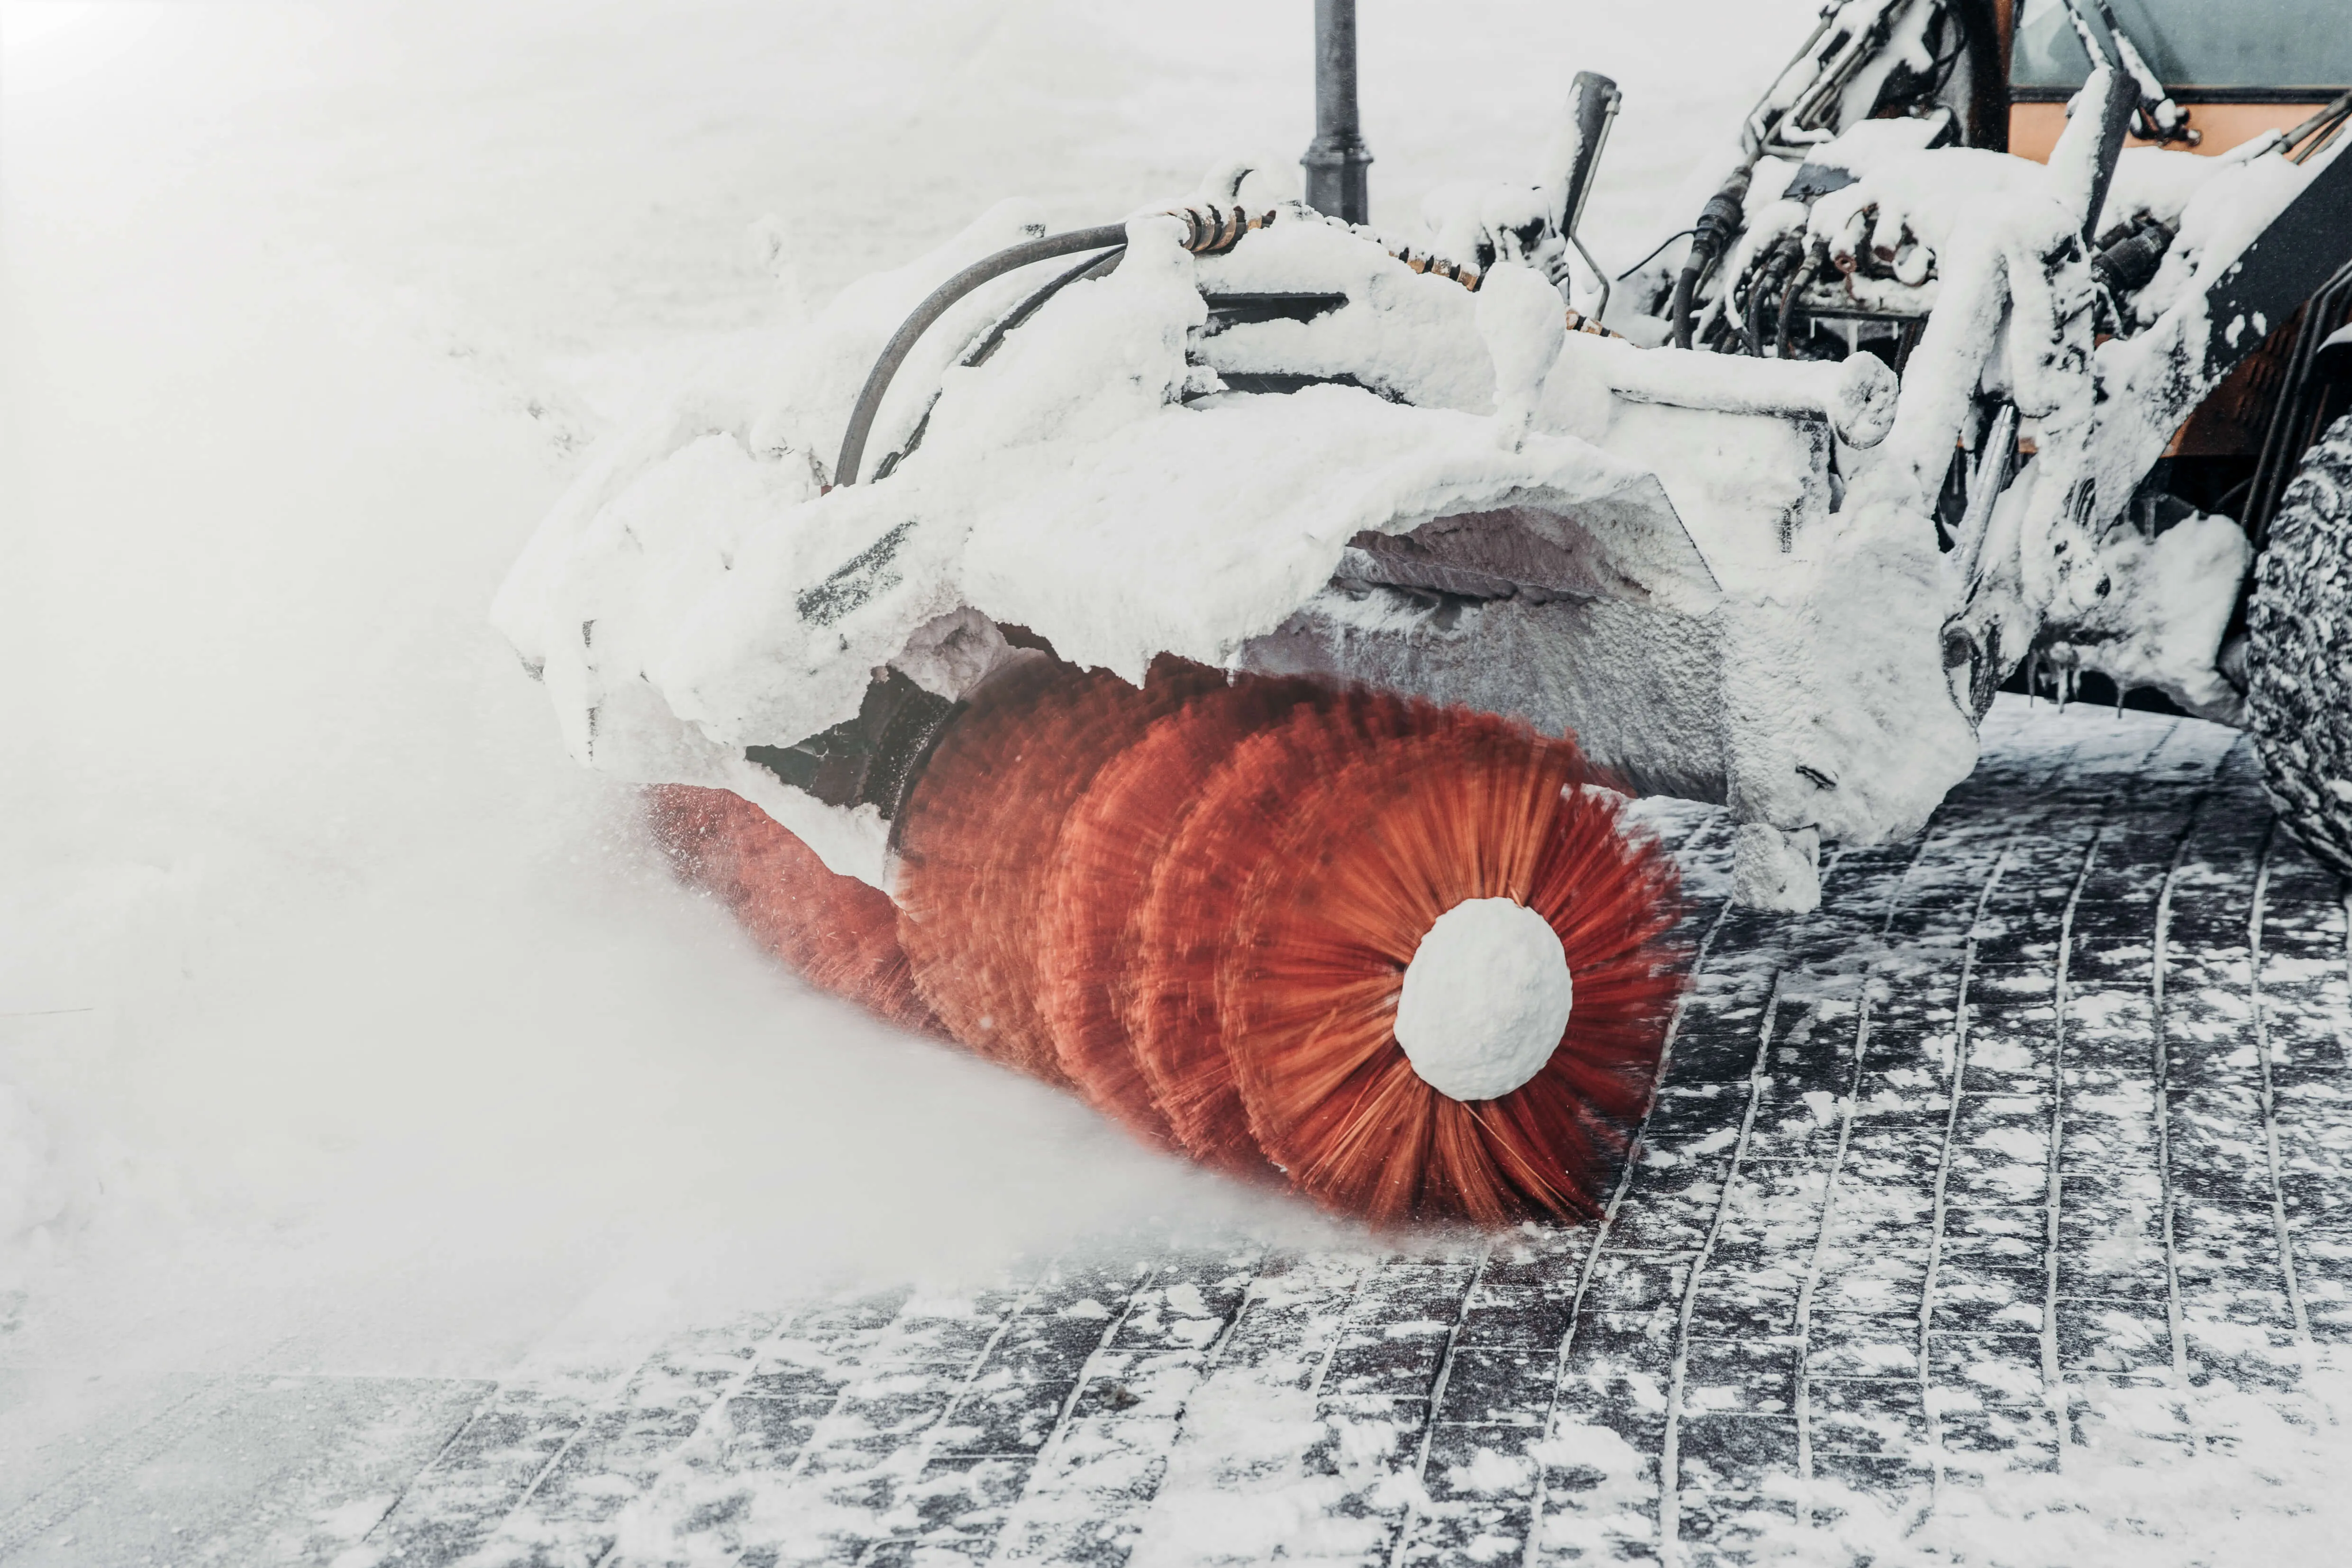 tractor-cleans-road-from-snow-after-blizzard